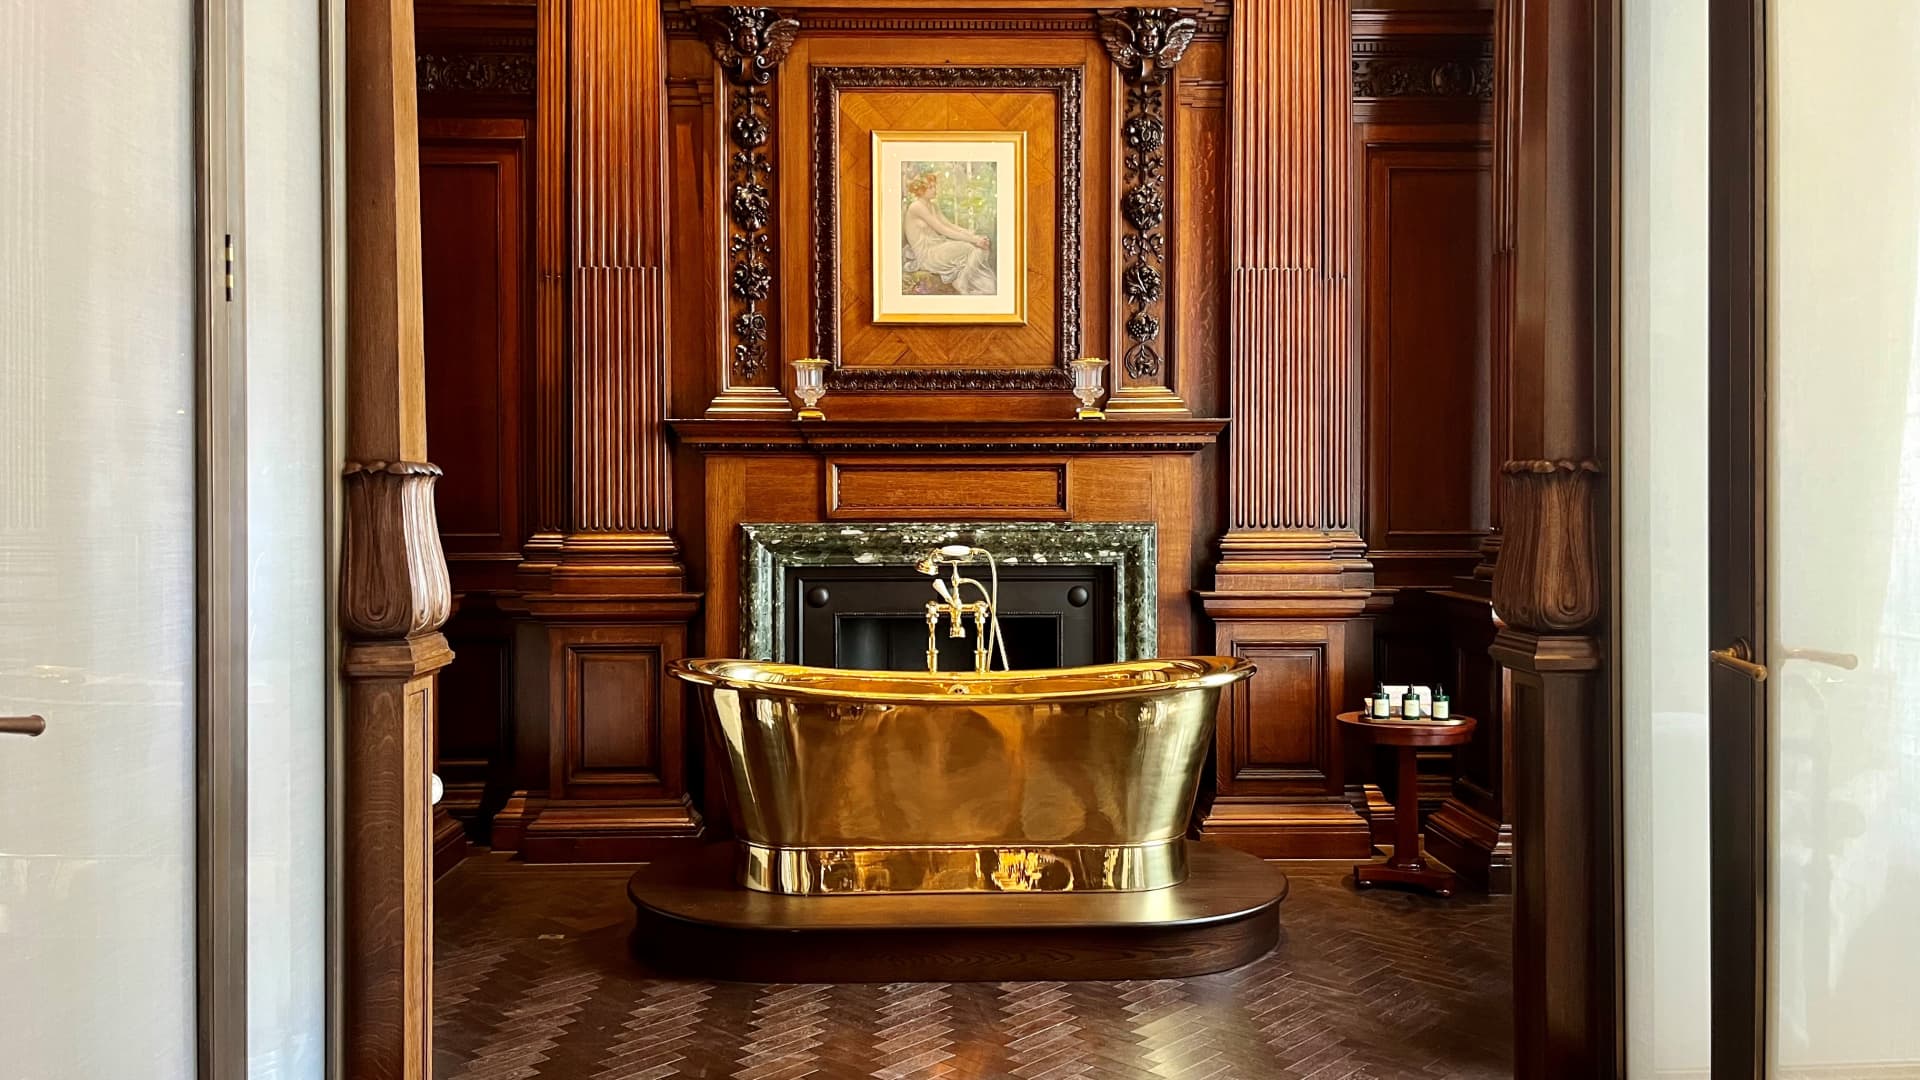 A roll top bath takes center stage in the opulent bathroom of the Granville Suite, named after British spy Christine Granville.